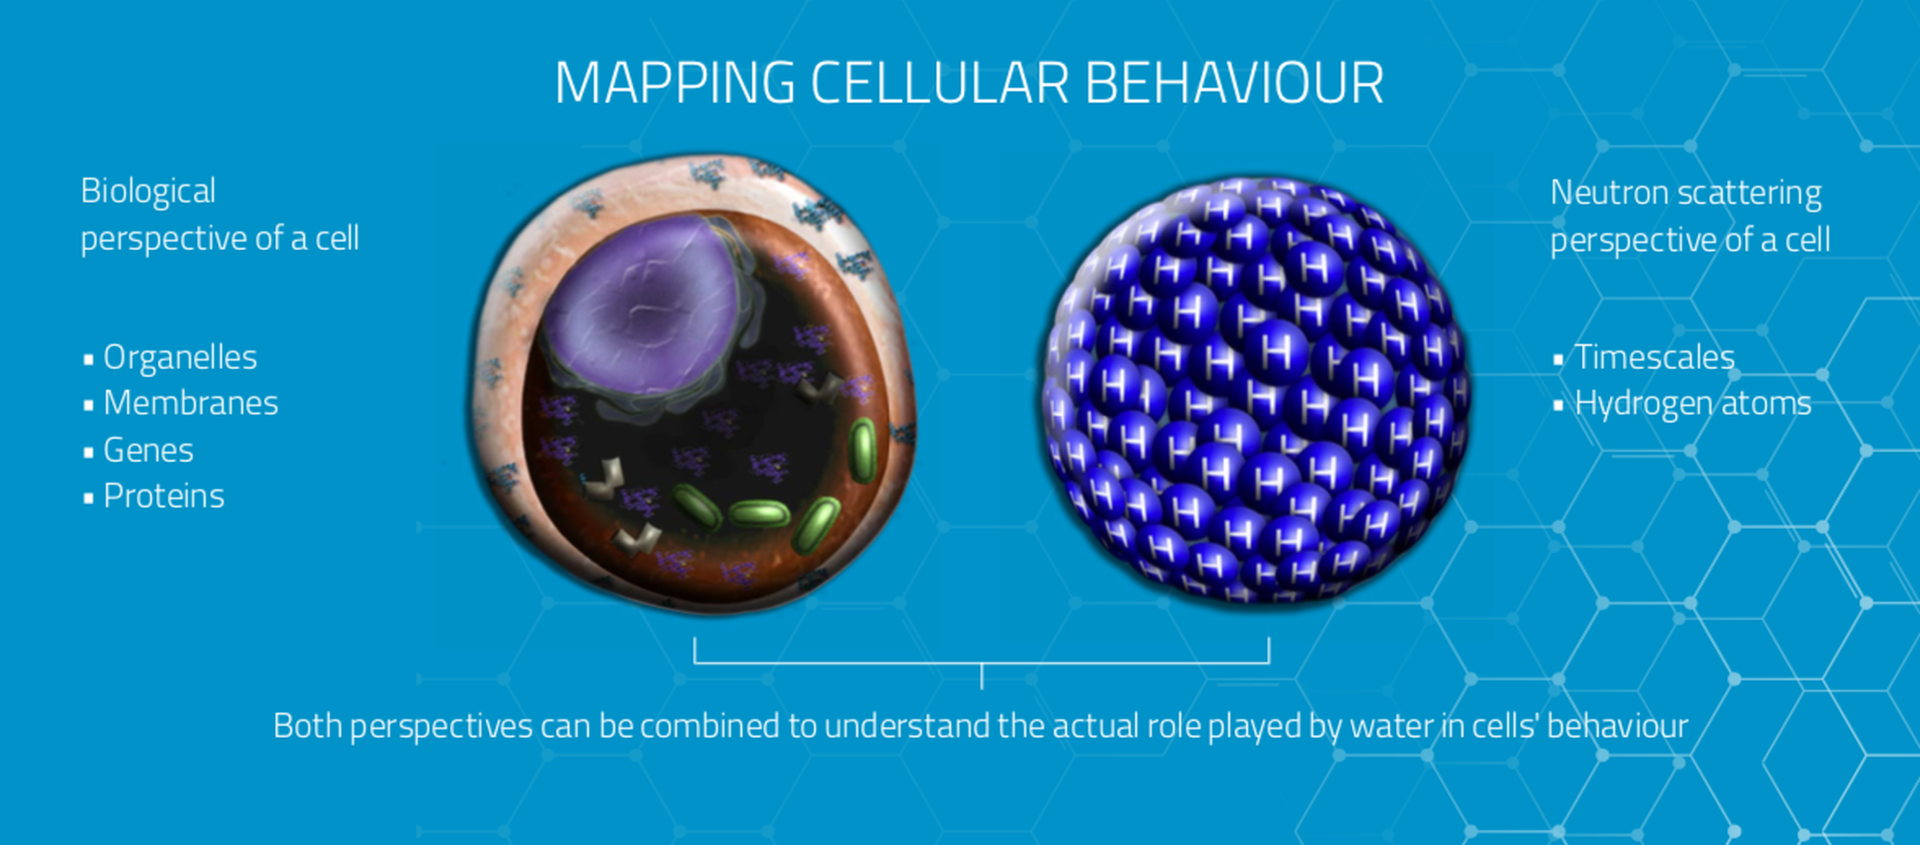 MIRACLES mapping cellular beahviour